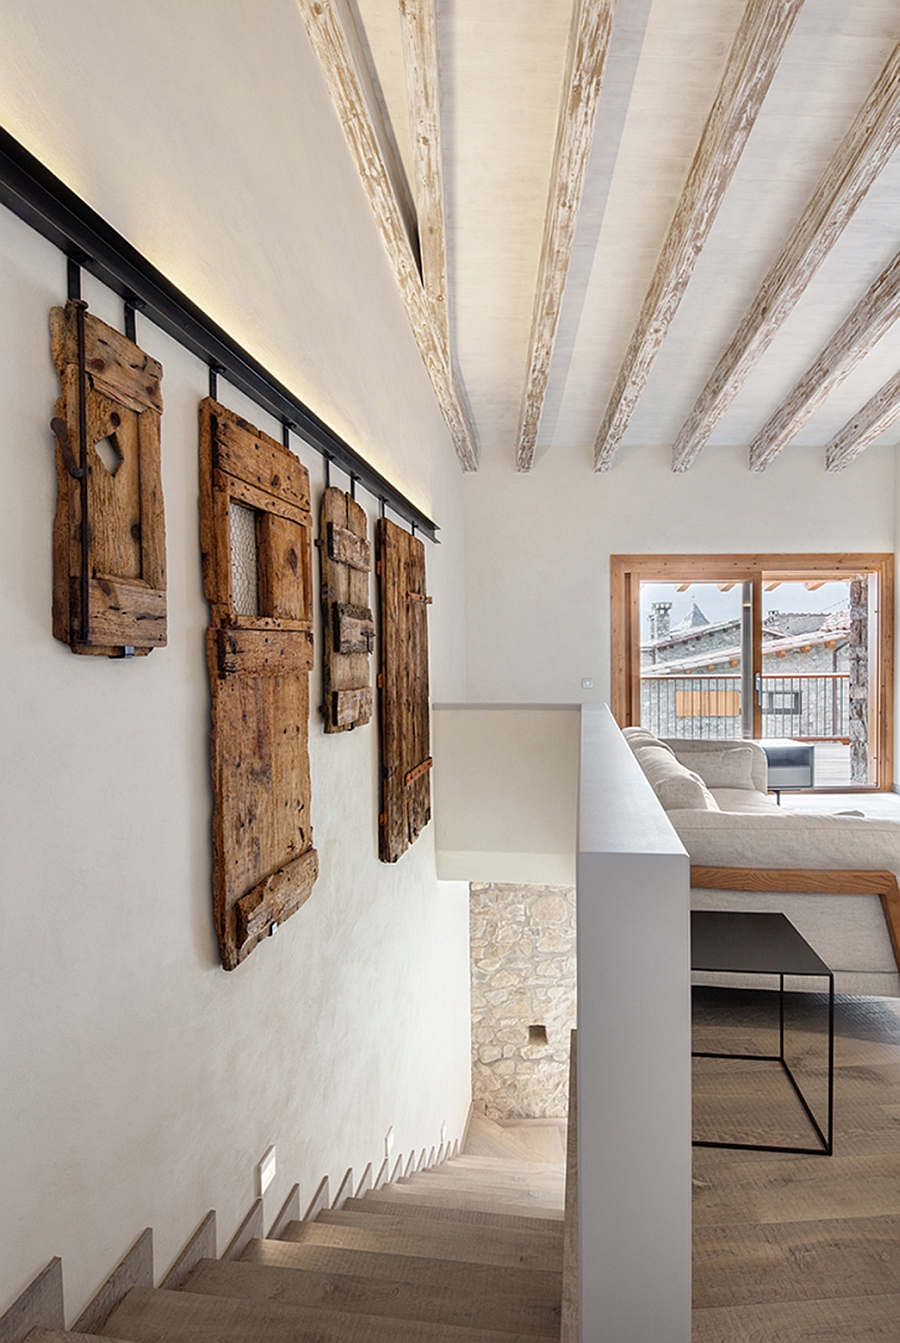 Spanish Revival: Old Farmhouse Transformed into a Striking ...